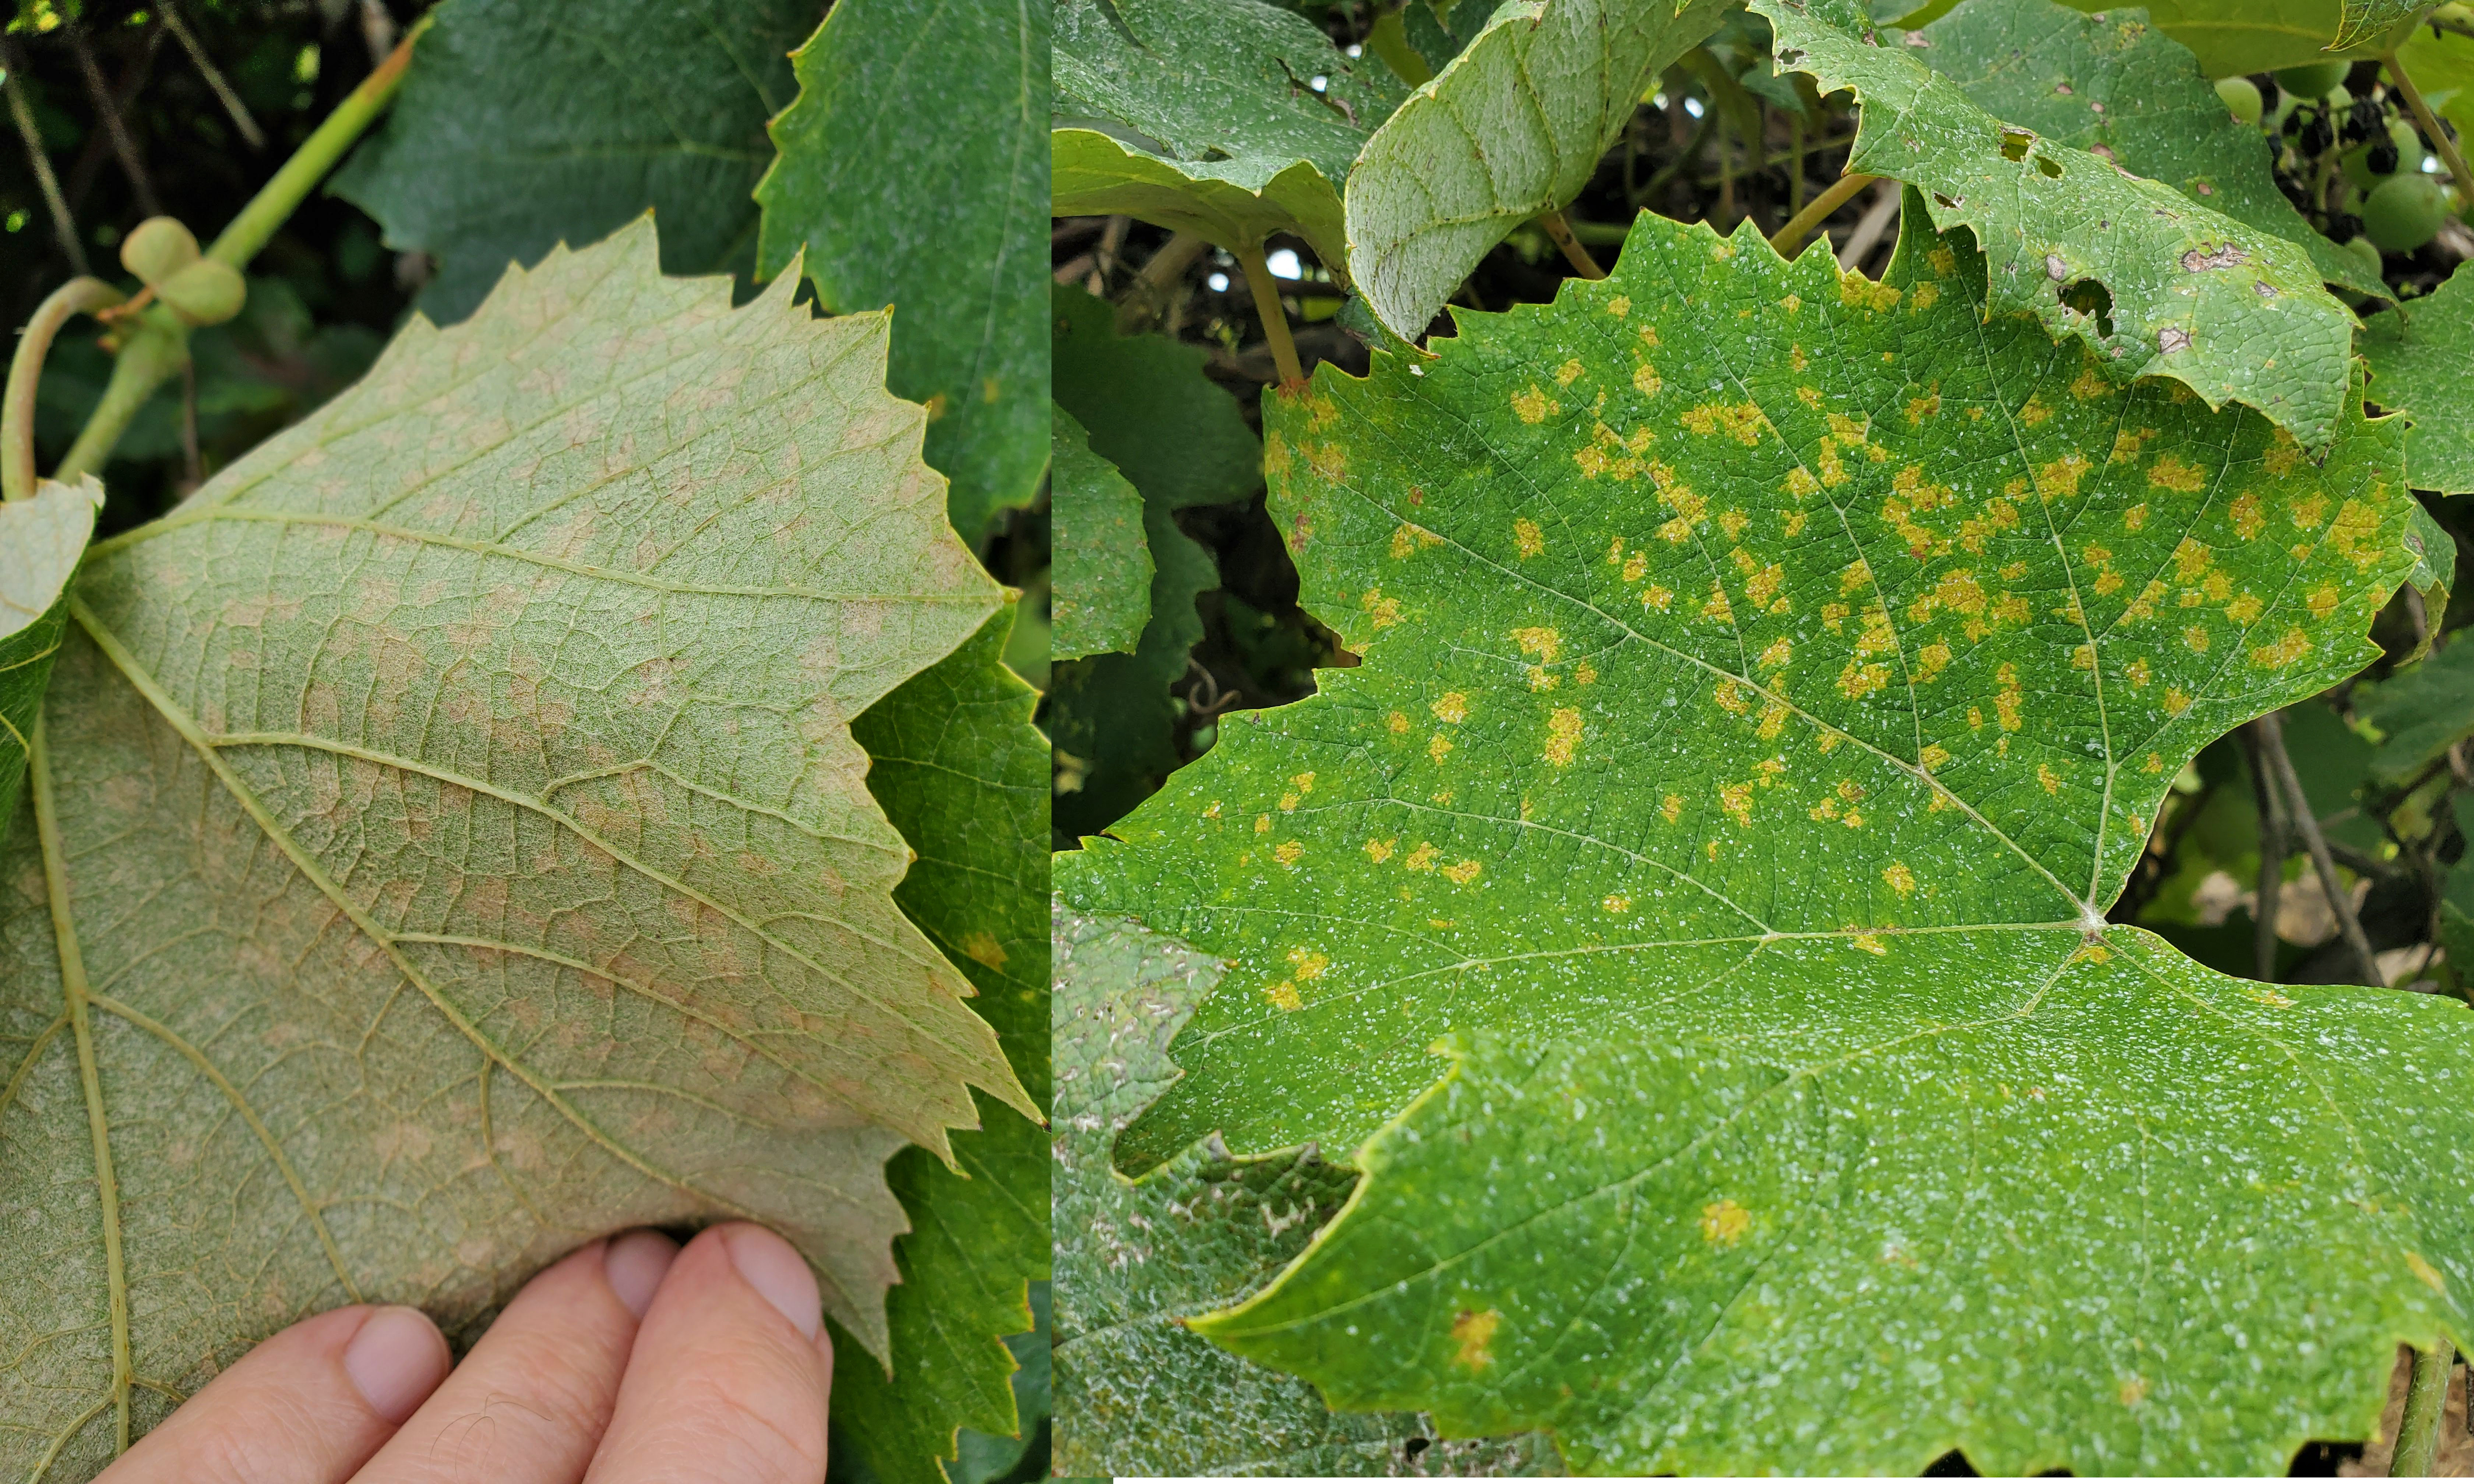 Downy mildew on grapes